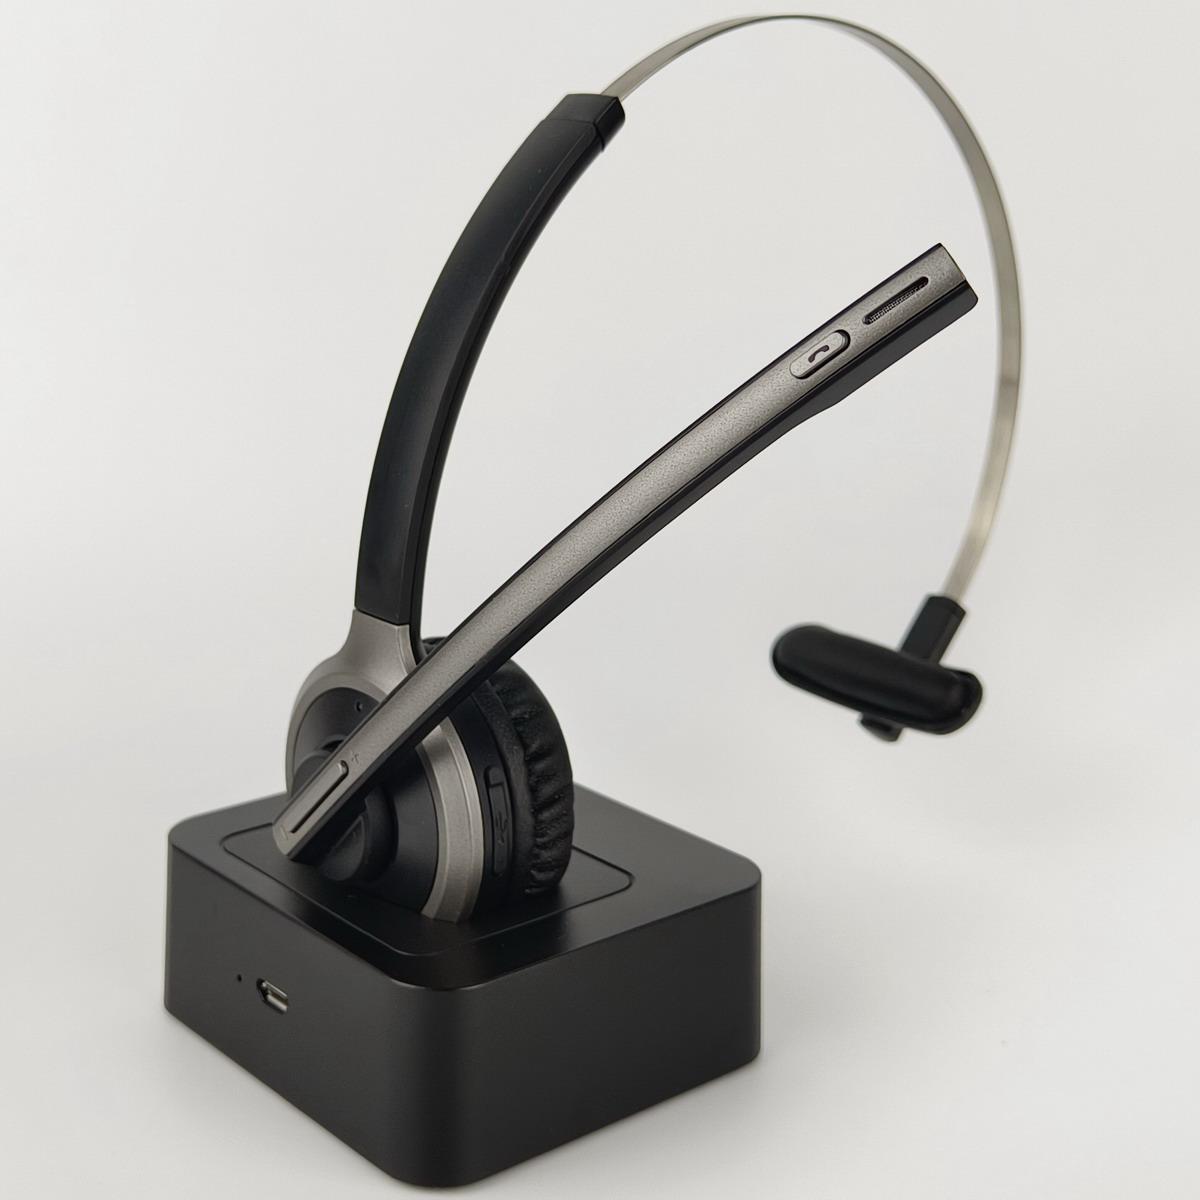 BT5,0 headset with power bank base